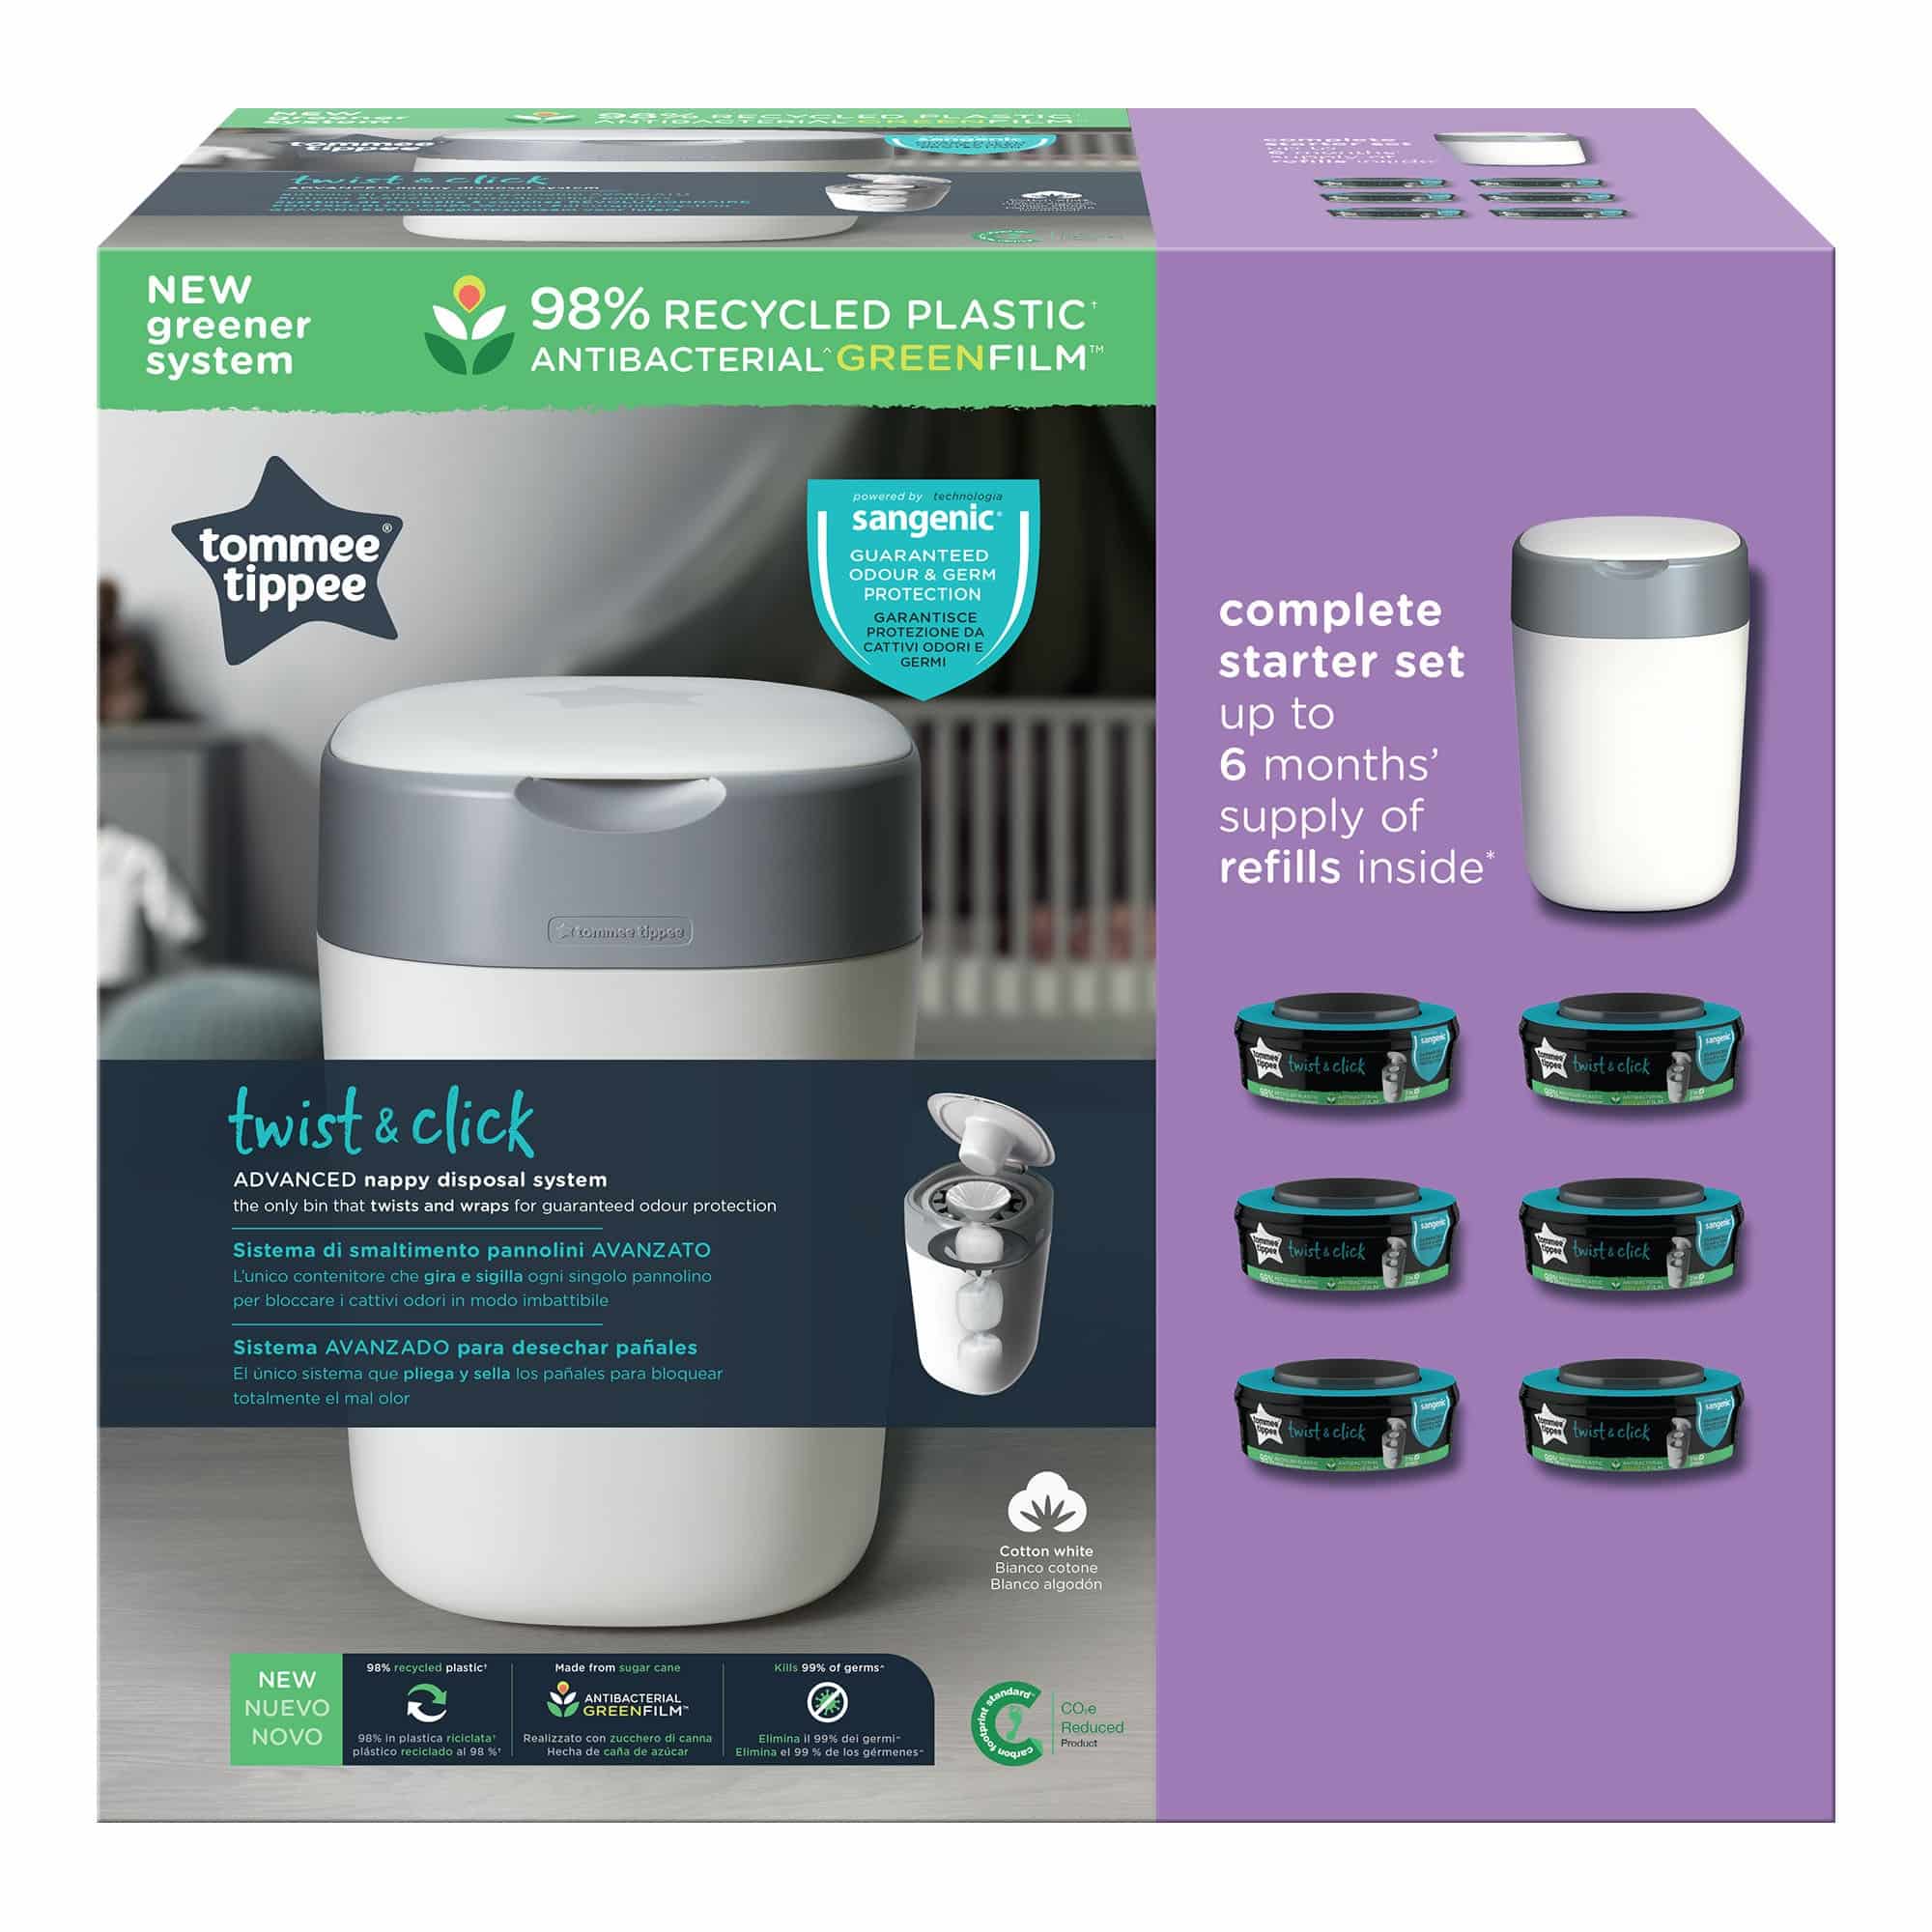 Tommee Tippee Twist & Click Nappy Bin - BRUTAL REVIEW 